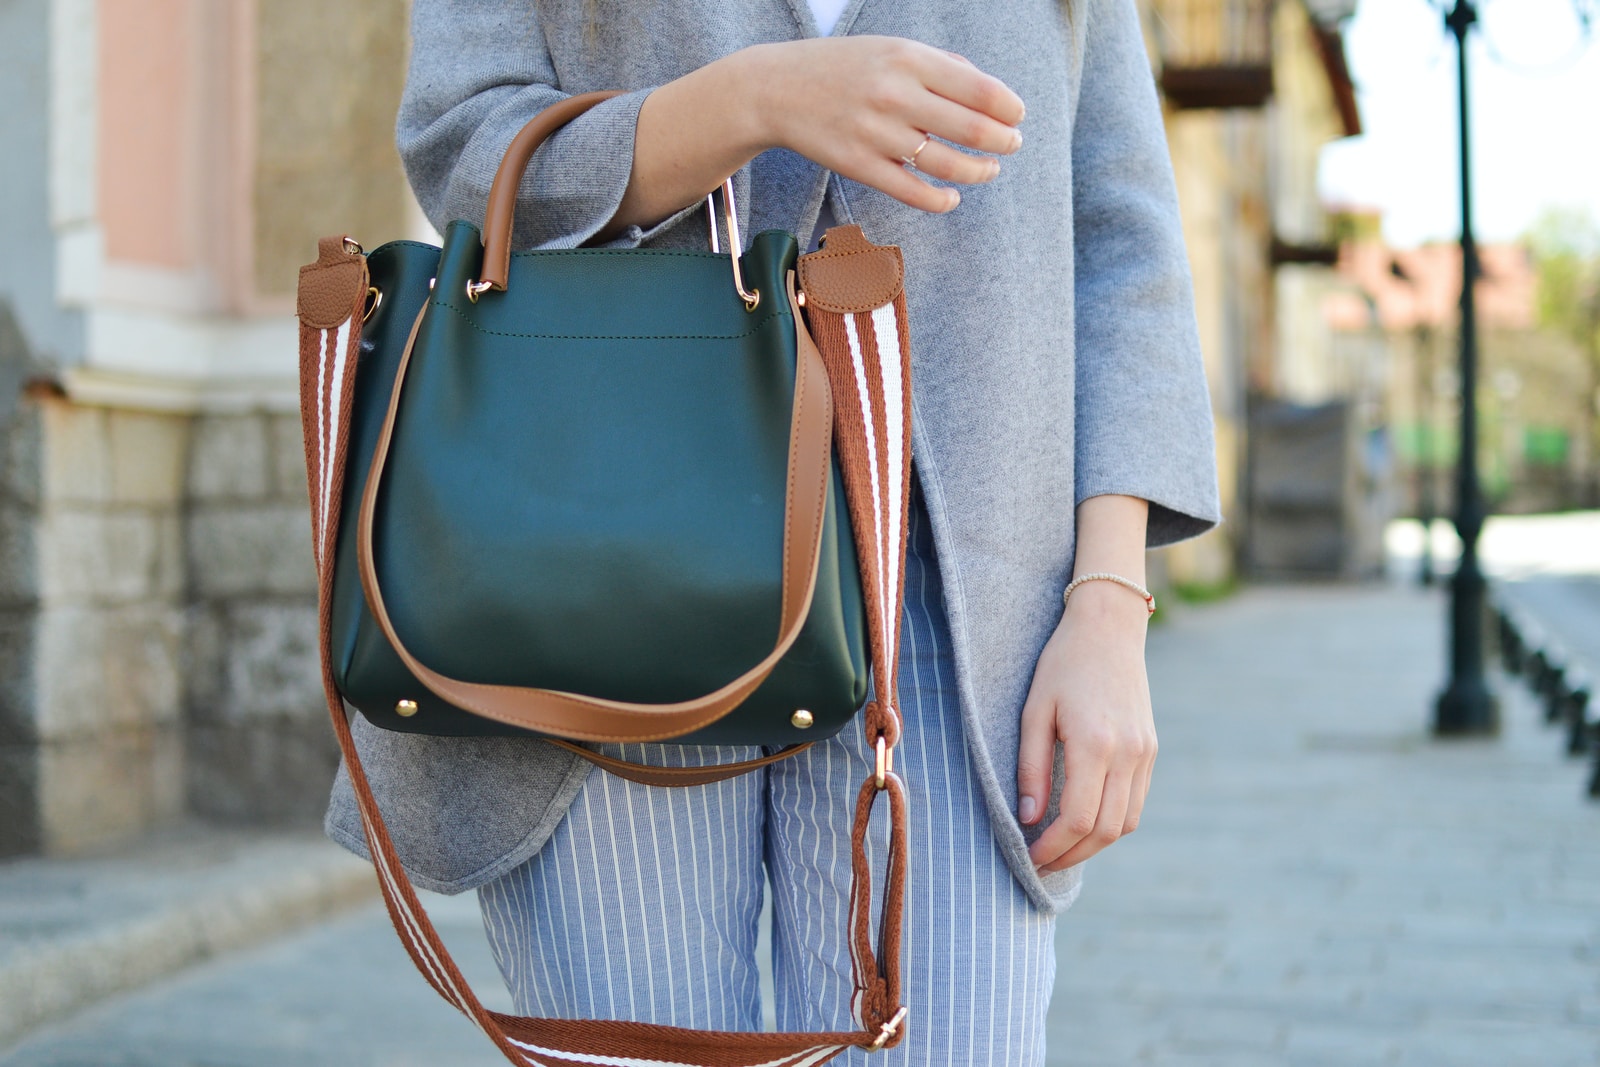 women standing while carrying green and brown leather 2-way shoulder bag